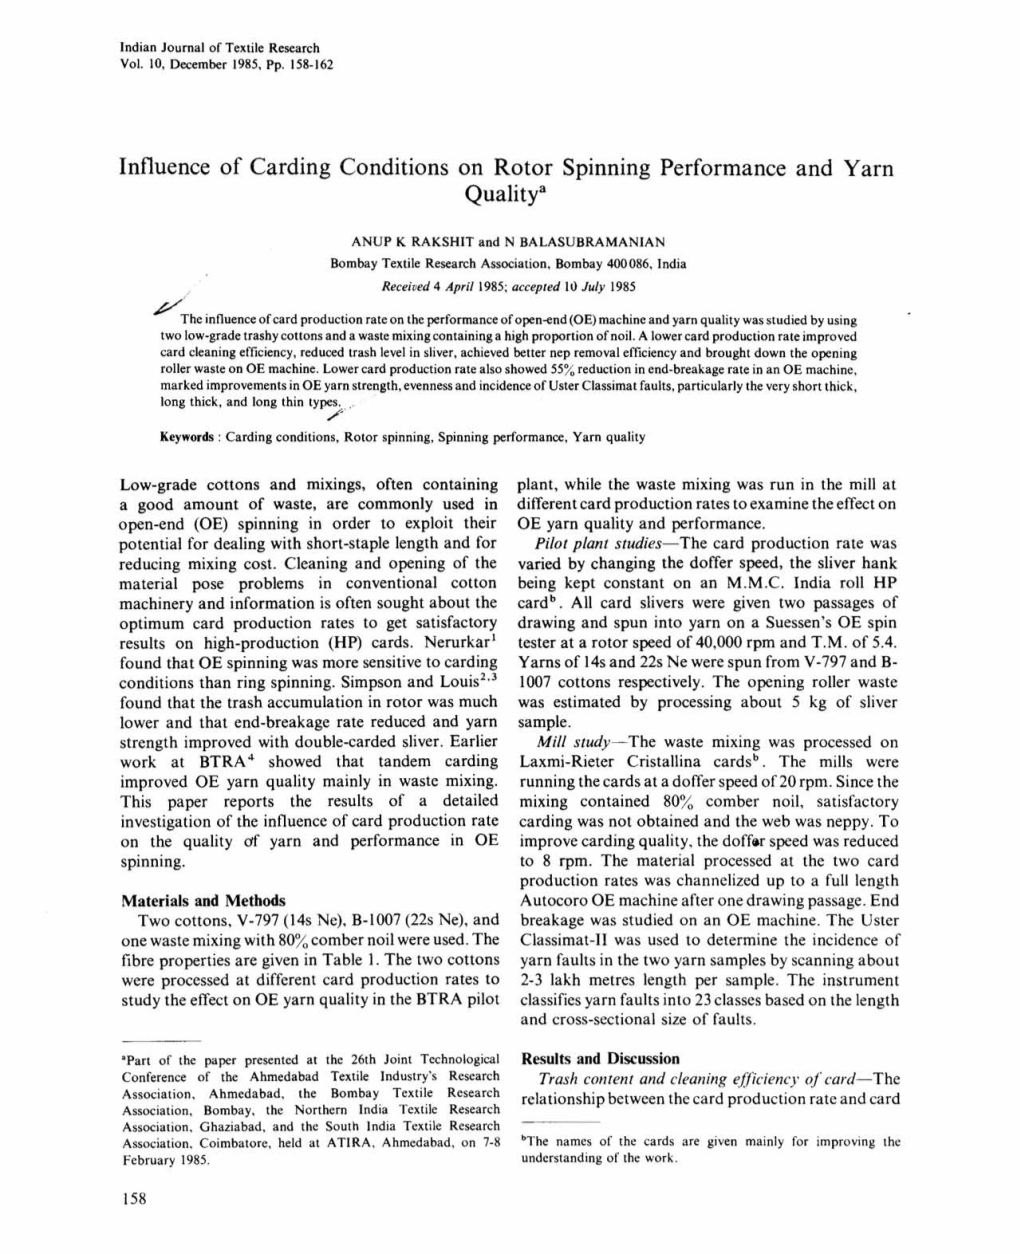 Influence of Carding Conditions on Rotor Spinning Performance and Yarn Quality"